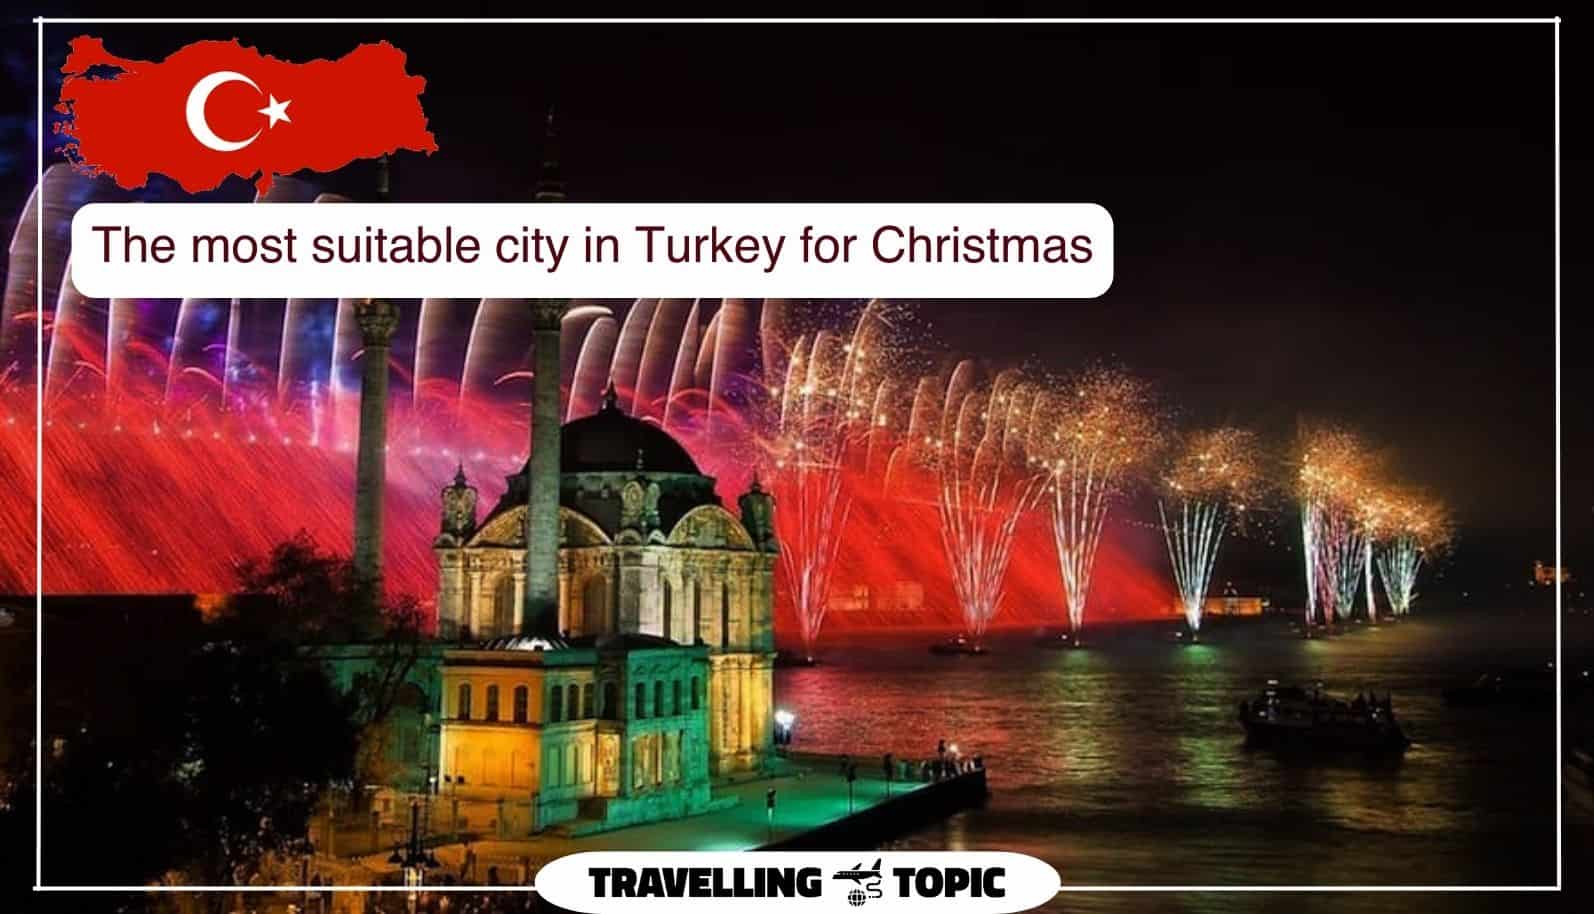 The most suitable city in Turkey for Christmas